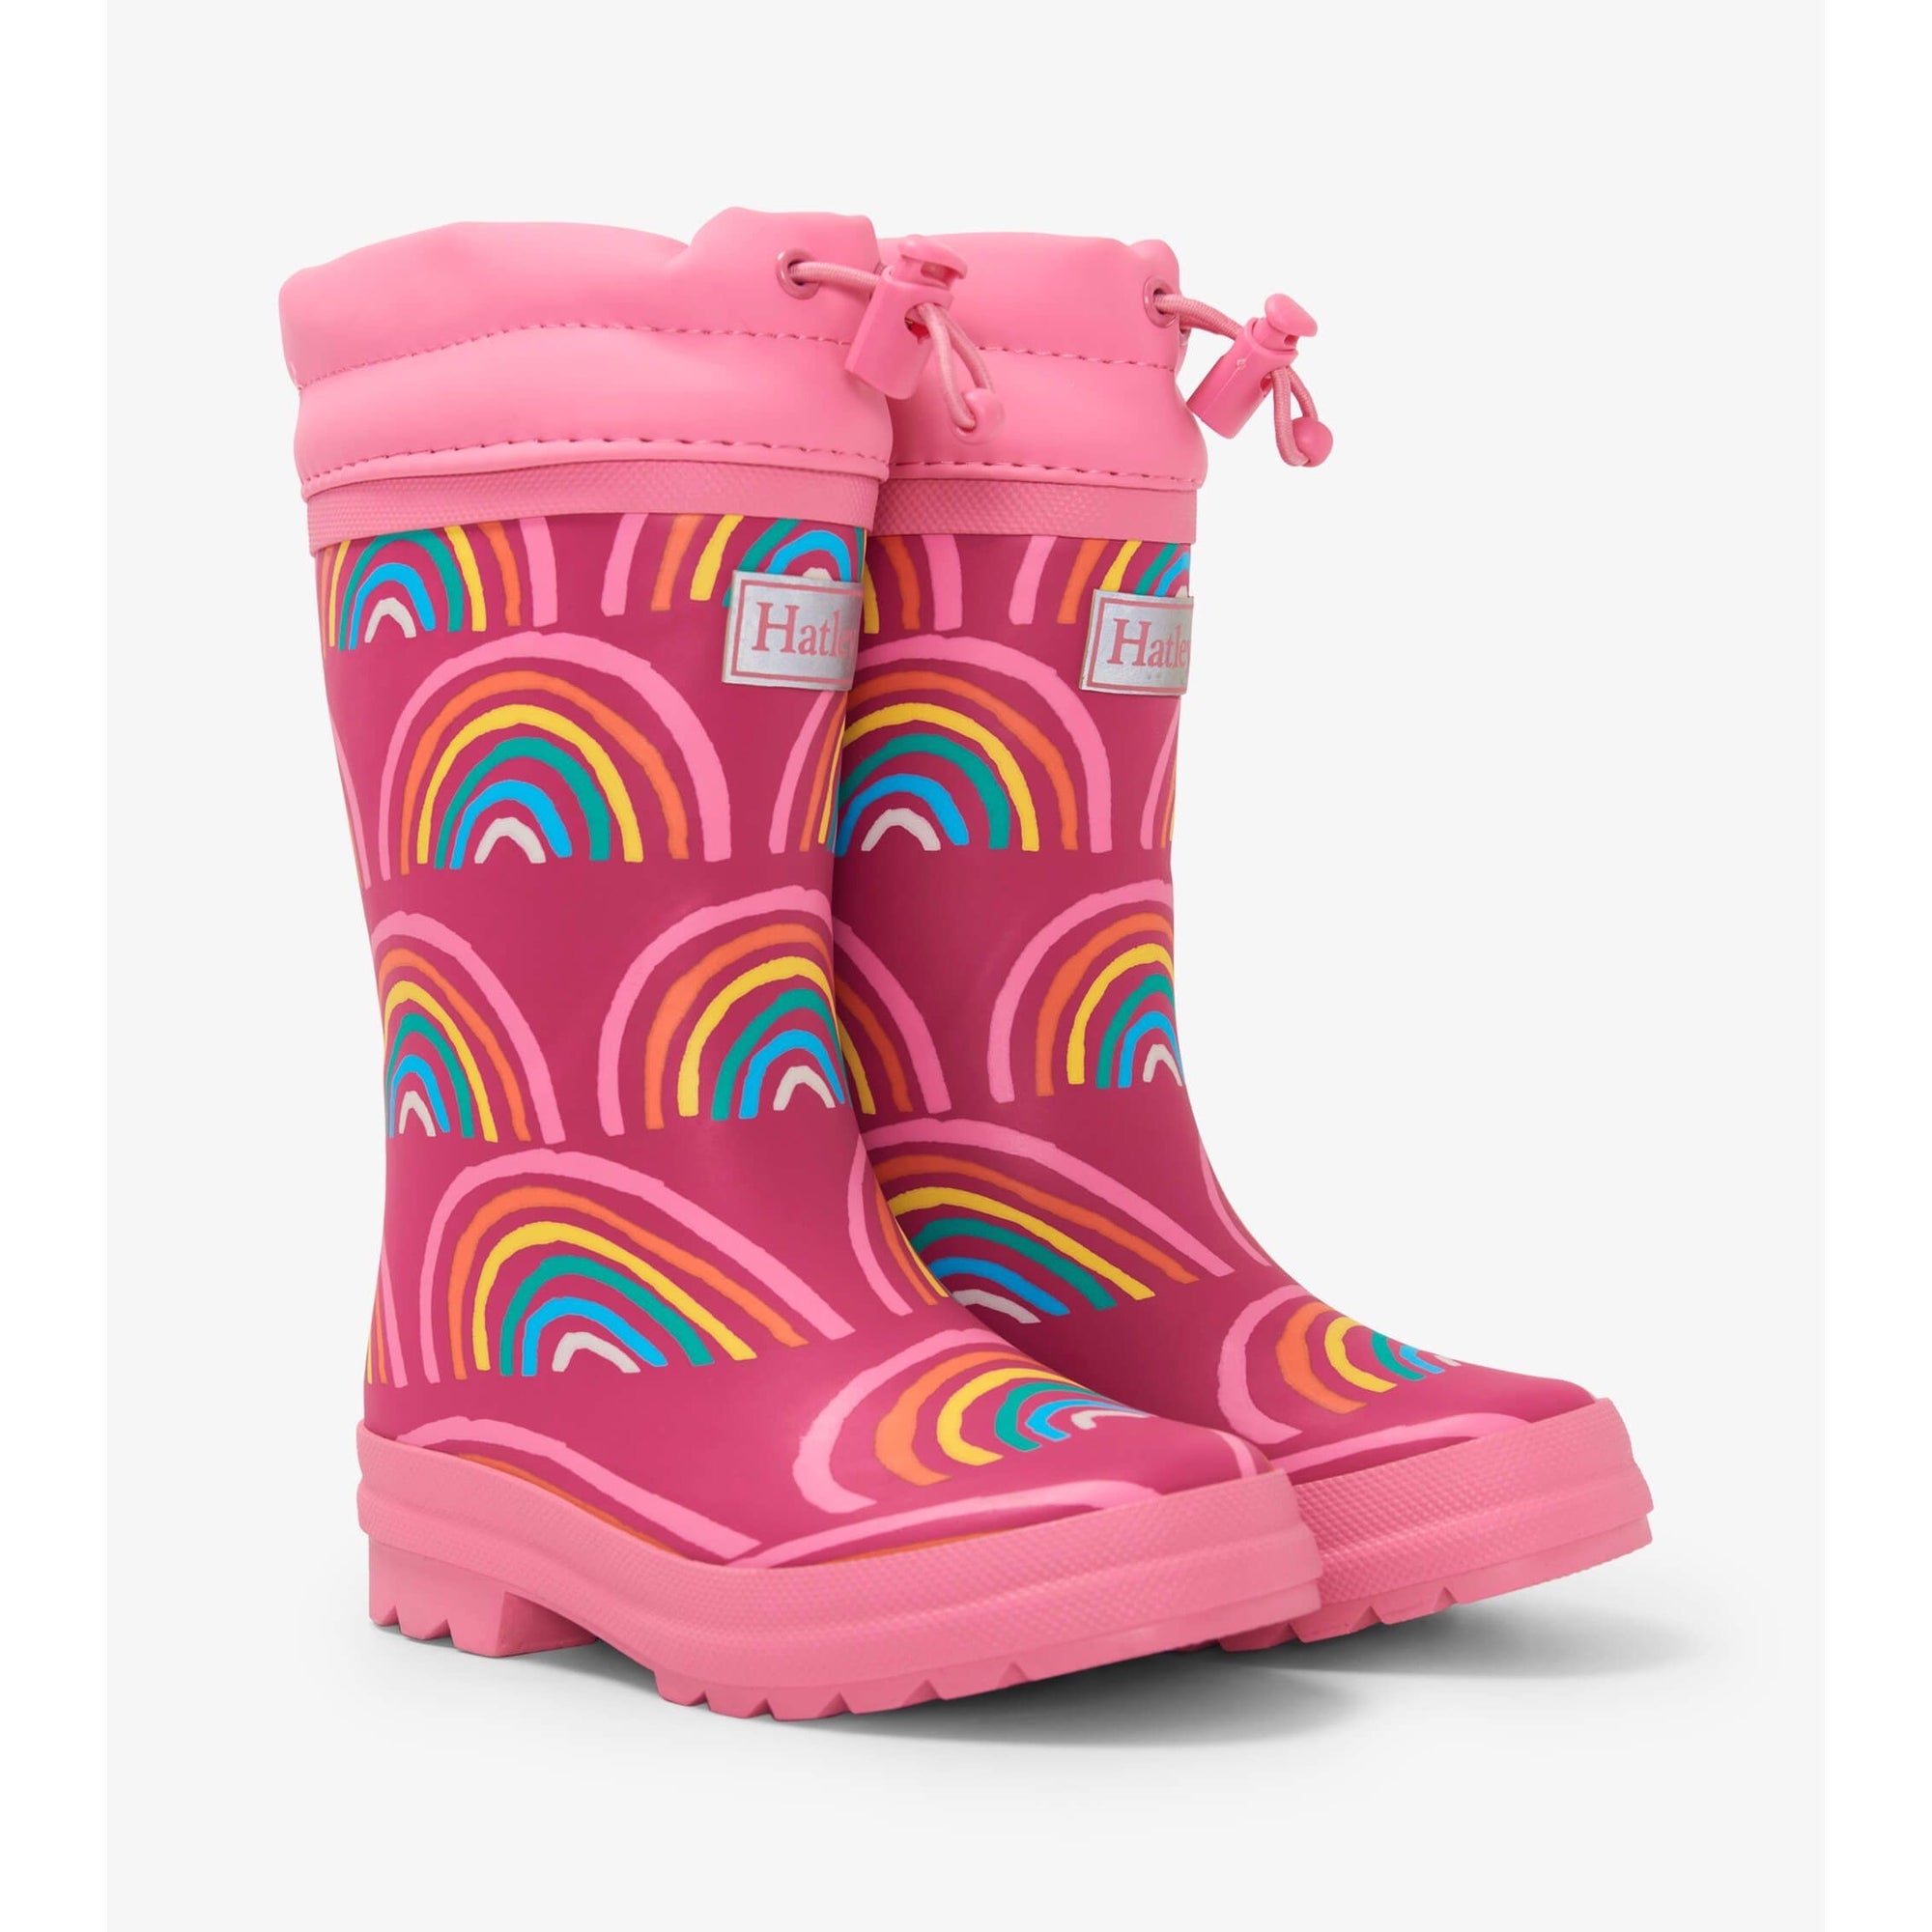 Hatley Rainbows Sherpa Lined Boots F22rdk1569 Footwear UK6 INFANT / Fuchsia,UK7 INFANT / Fuchsia,UK8 INFANT / Fuchsia,UK9 KIDS / Fuchsia,UK10 KIDS / Fuchsia,UK11 KIDS / Fuchsia,UK12 KIDS / Fuchsia,UK13 KIDS / Fuchsia,UK1 KIDS / Fuchsia,UK2 KIDS / Fuchsia,UK3 KIDS / Fuchsia